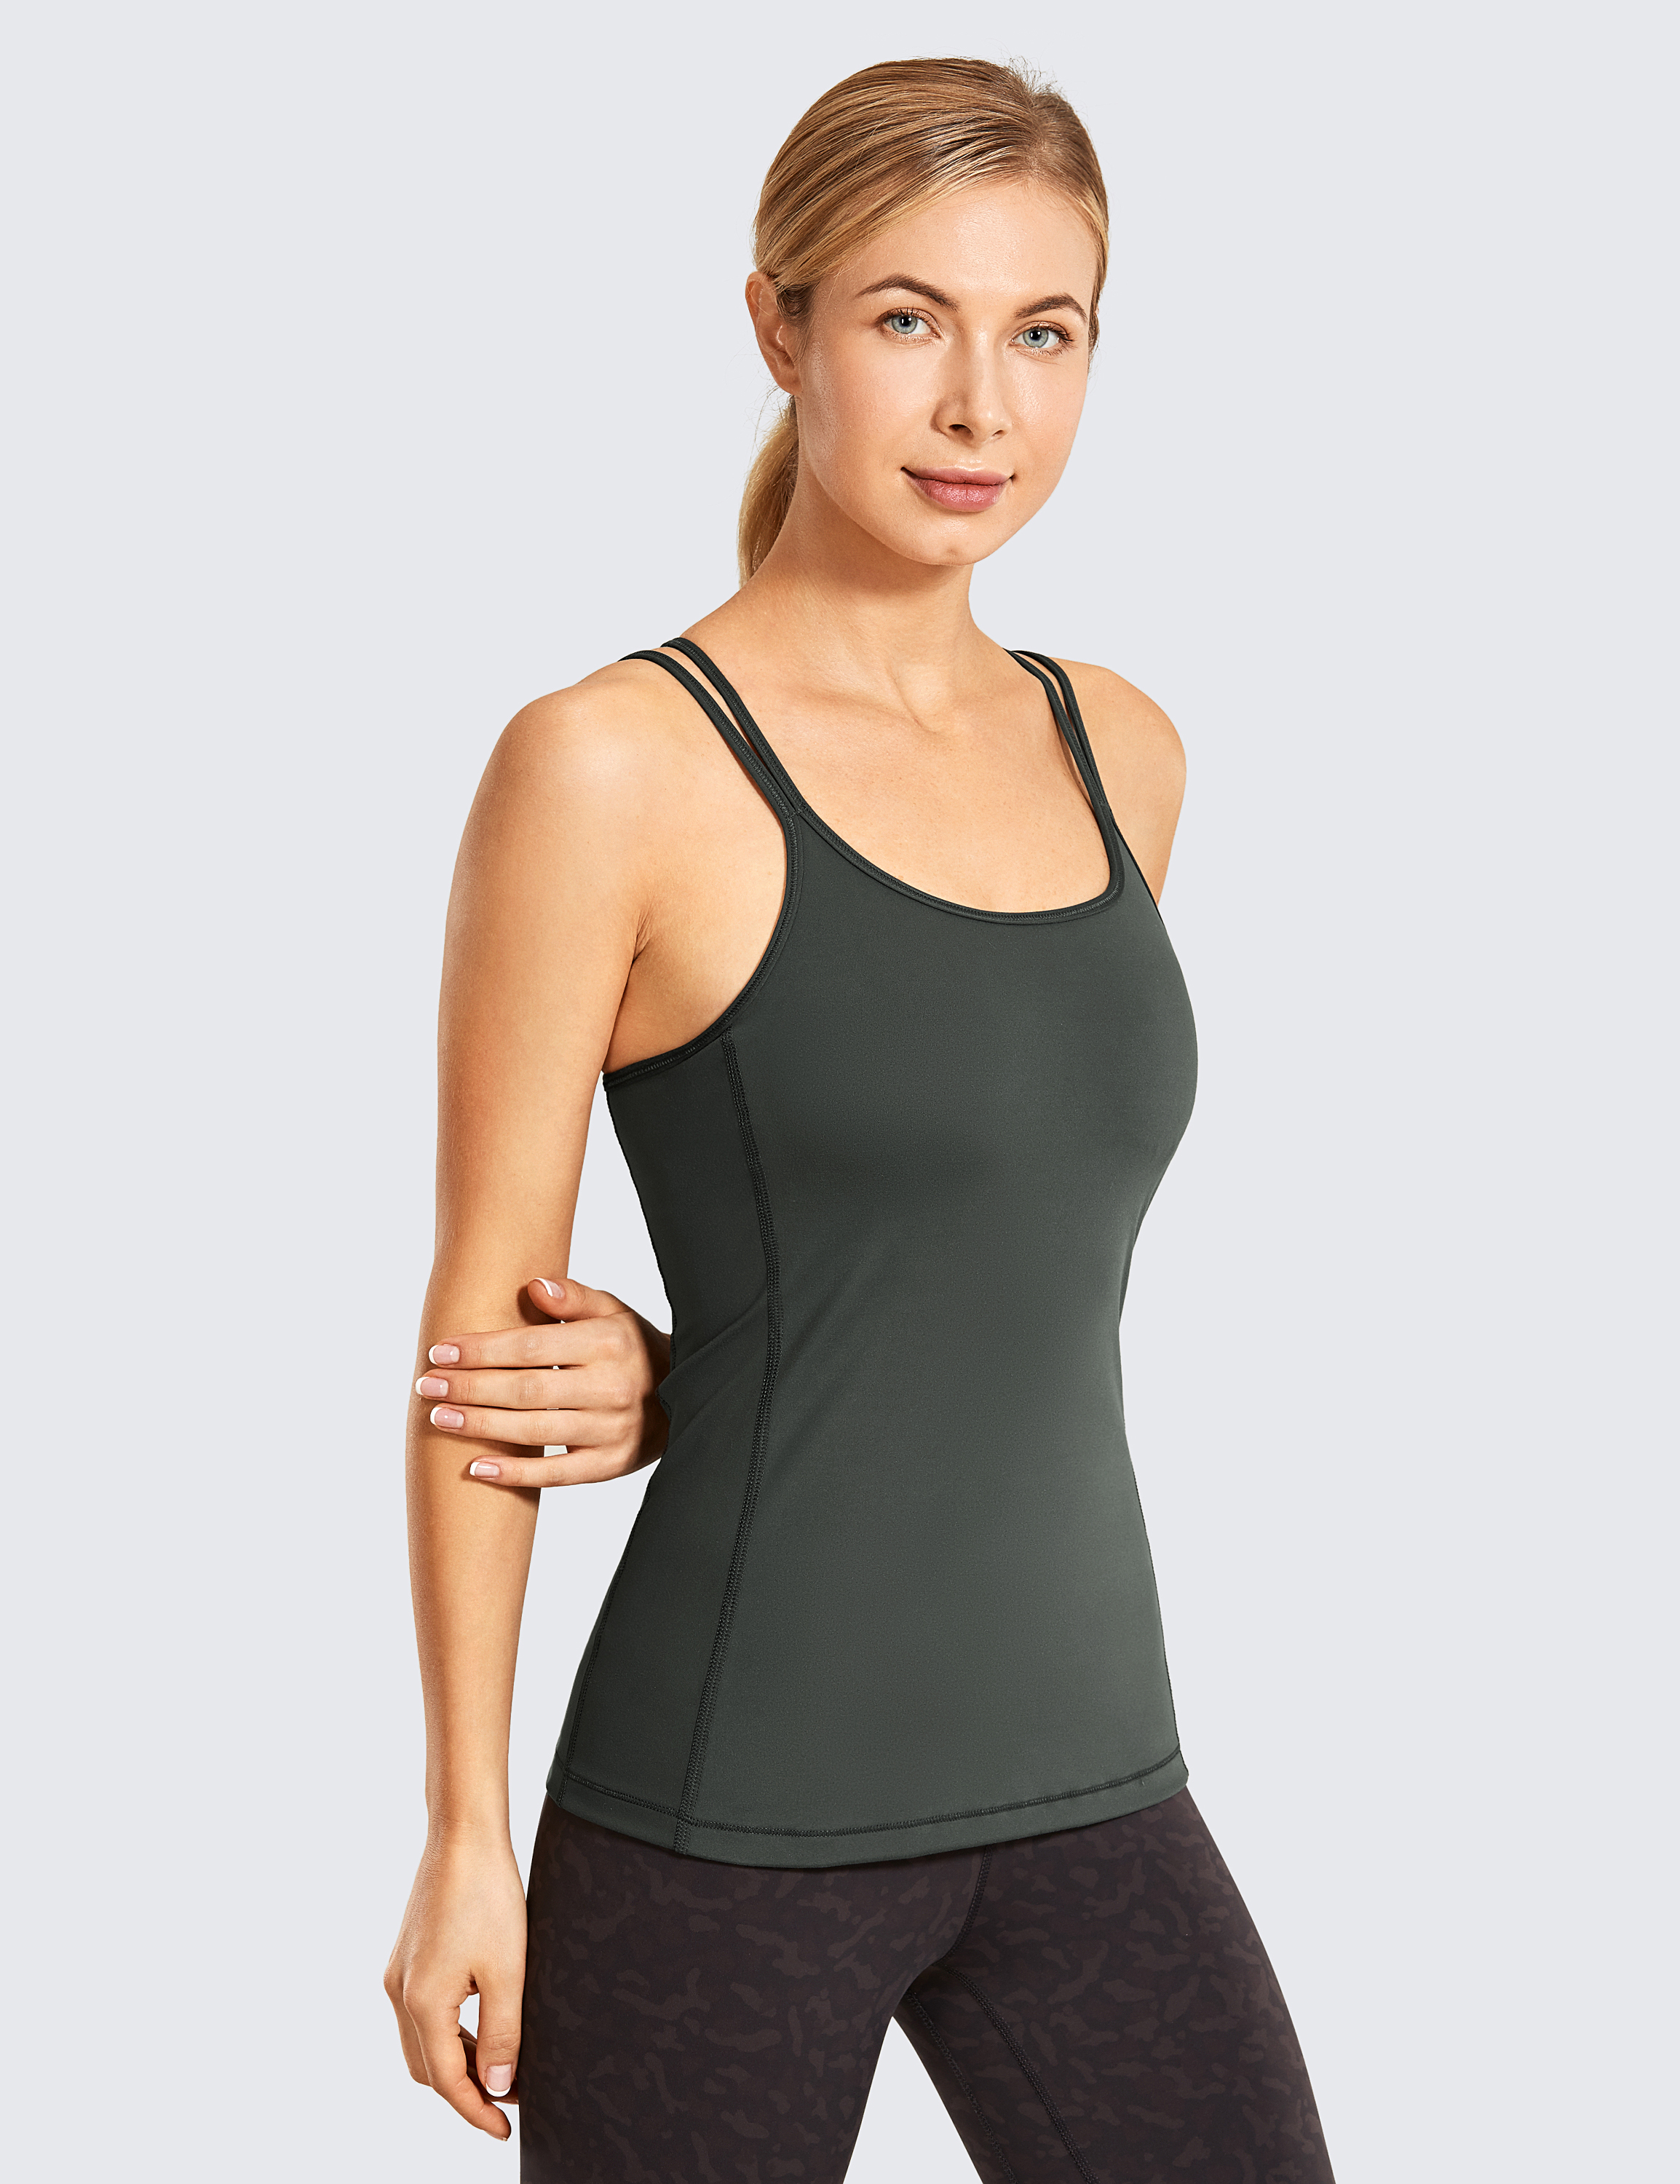 Ribbed Workout Tank Tops For Women With Built In Bra Tight